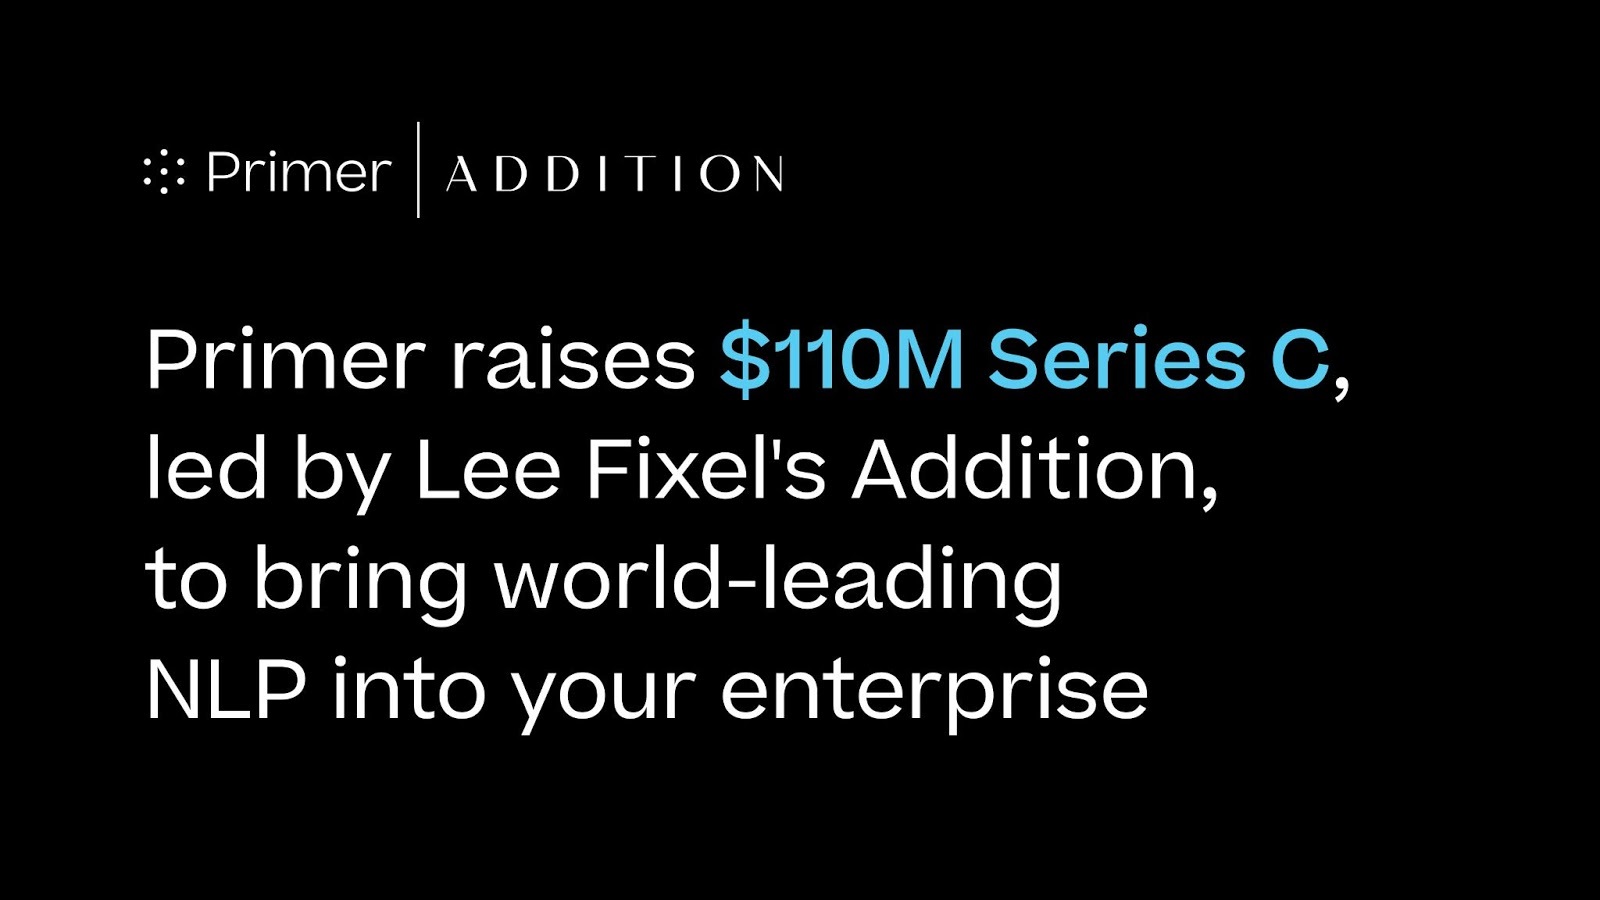 Primer Raises $110M Series C, Led by Lee Fixel's Addition, to Bring World-Leading NLP Into Your Enterprise